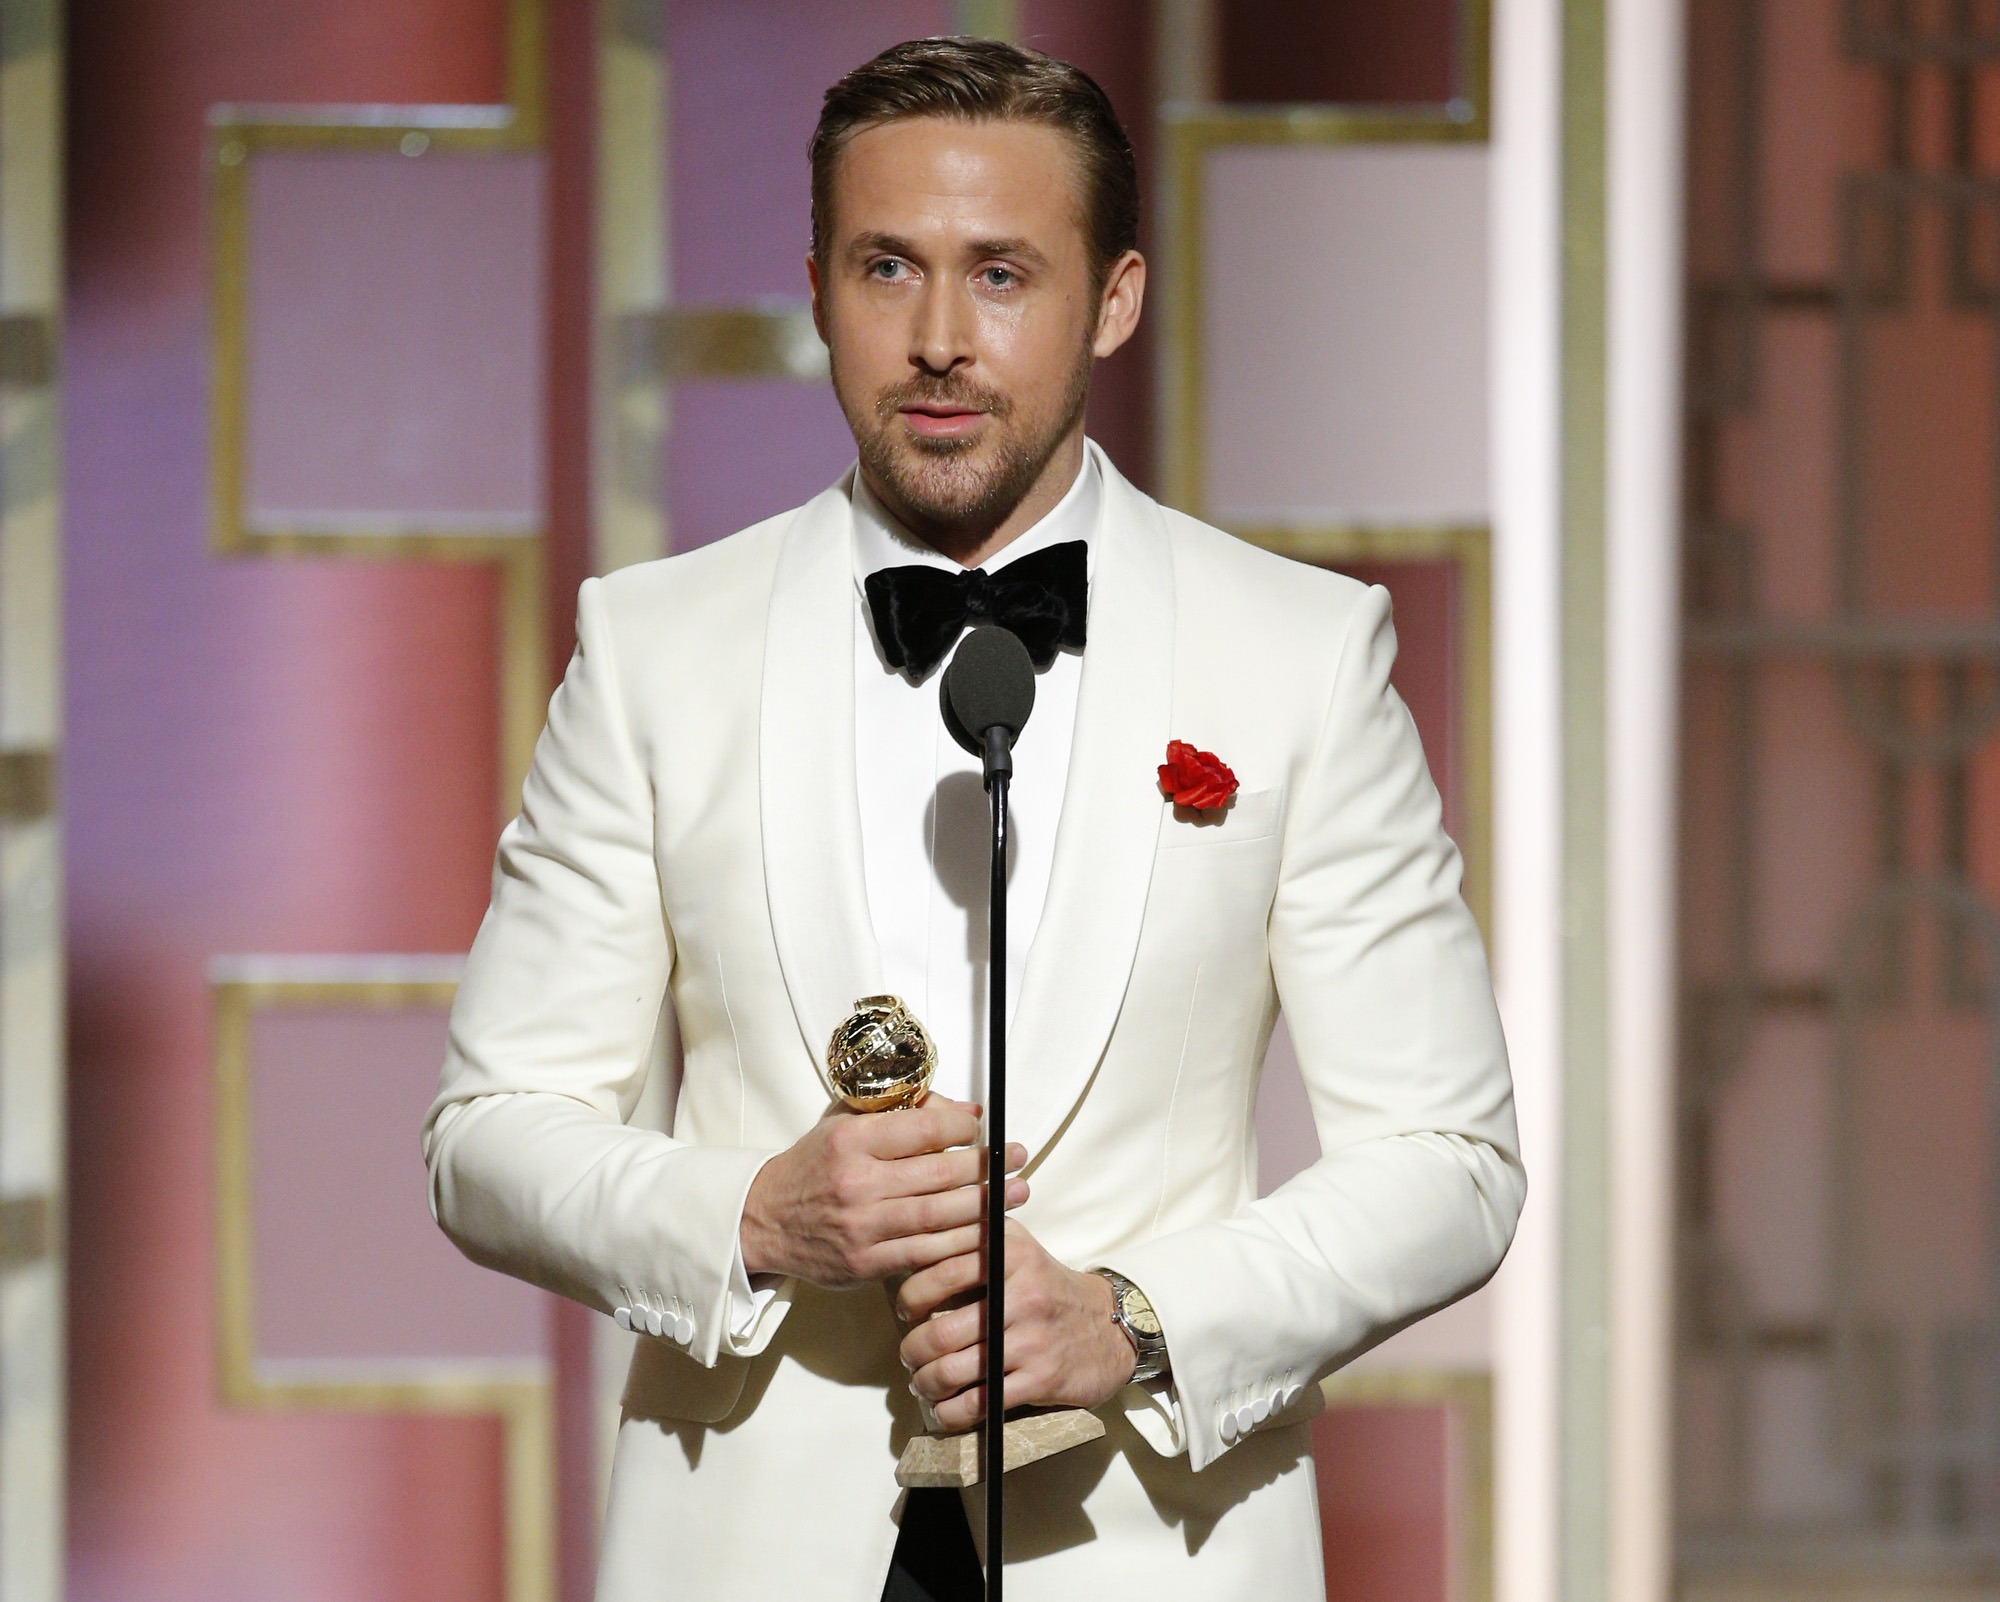 Ryan Gosling accepts the award for Best Actor in a Motion Picture - Musical or Comedy for his role in "La La Land" during the 74th Annual Golden Globe Awards at The Beverly Hilton Hotel in Beverly Hills, California on January 8, 2017. | Source: Getty Images